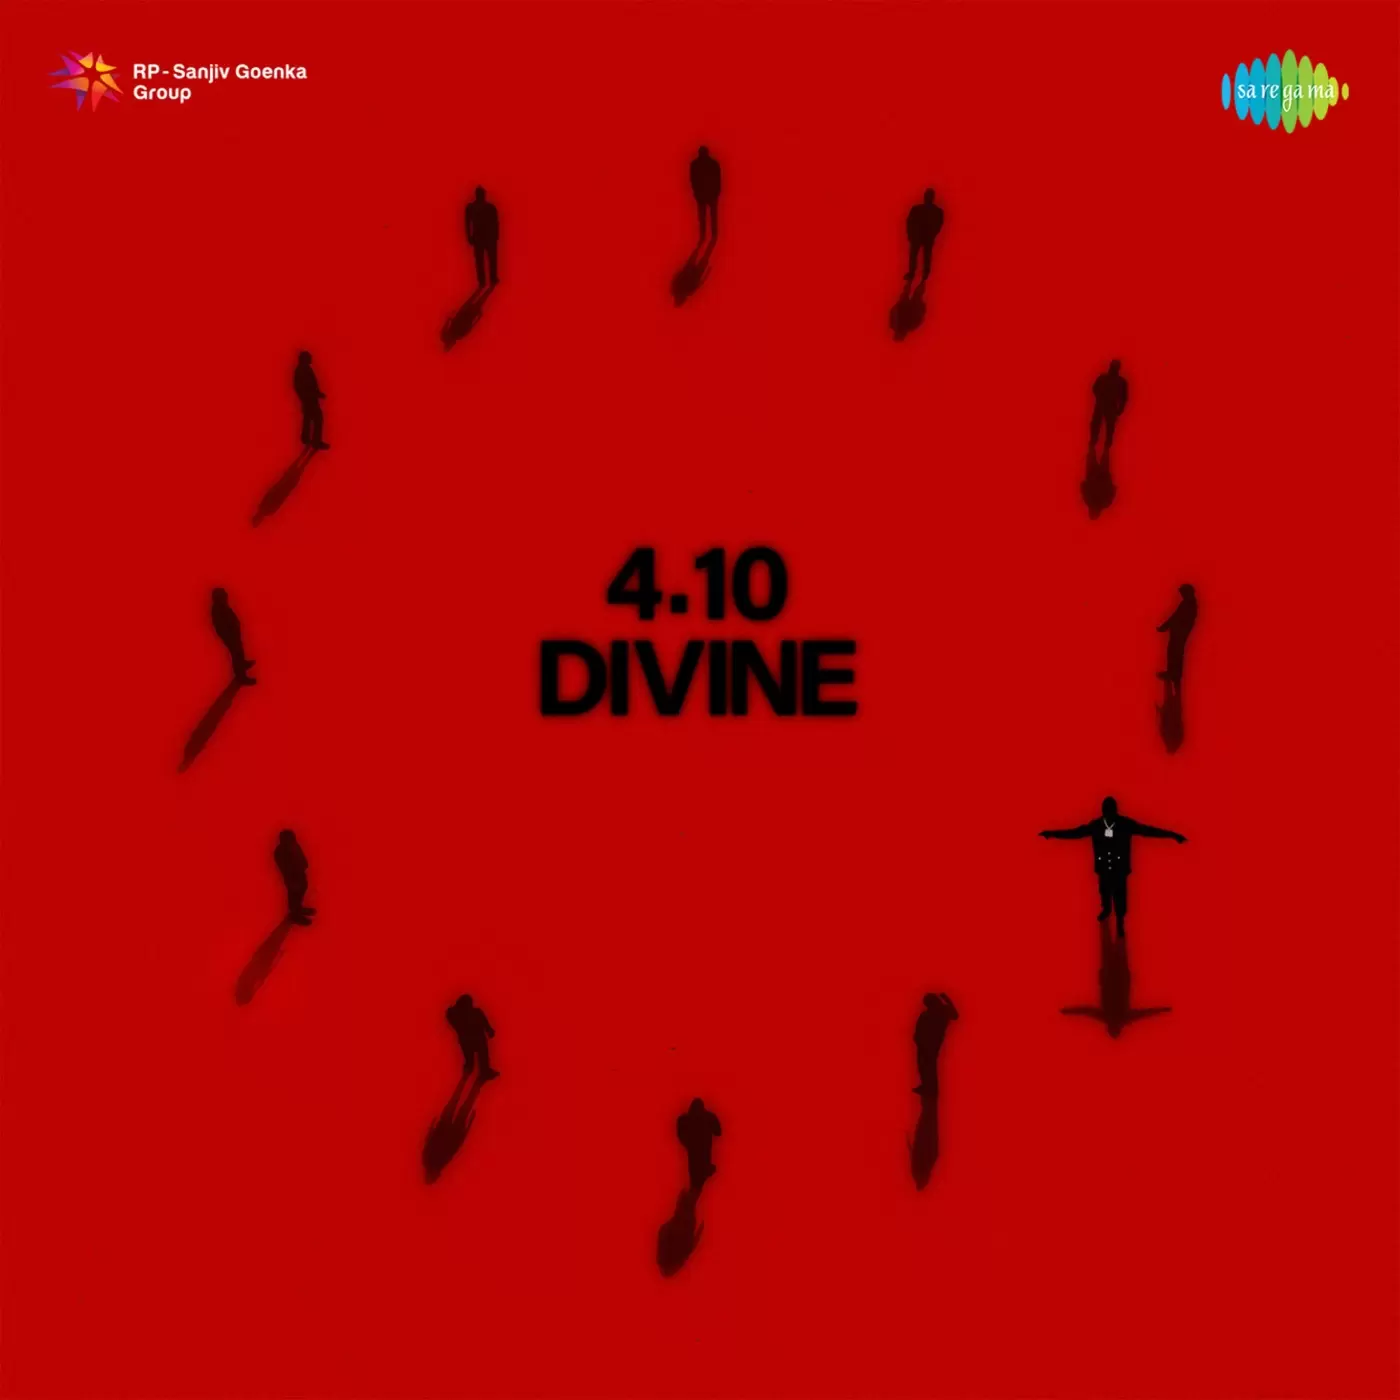 4 - 10 - Single Song by Divine - Mr-Punjab